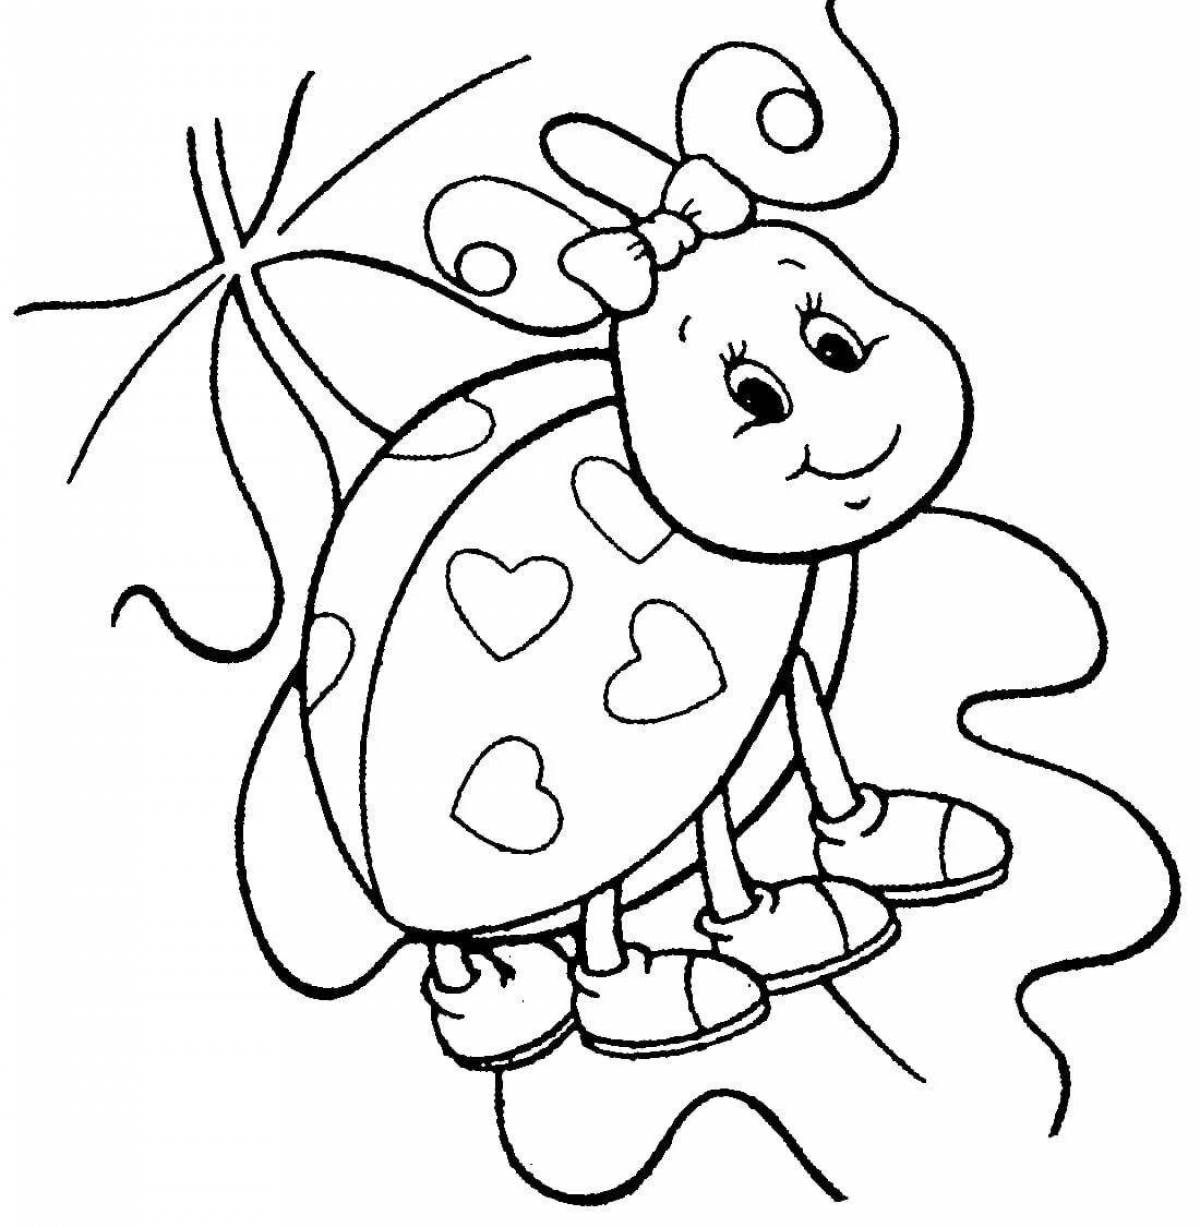 Fun coloring book of a ladybug for 6-7 year olds